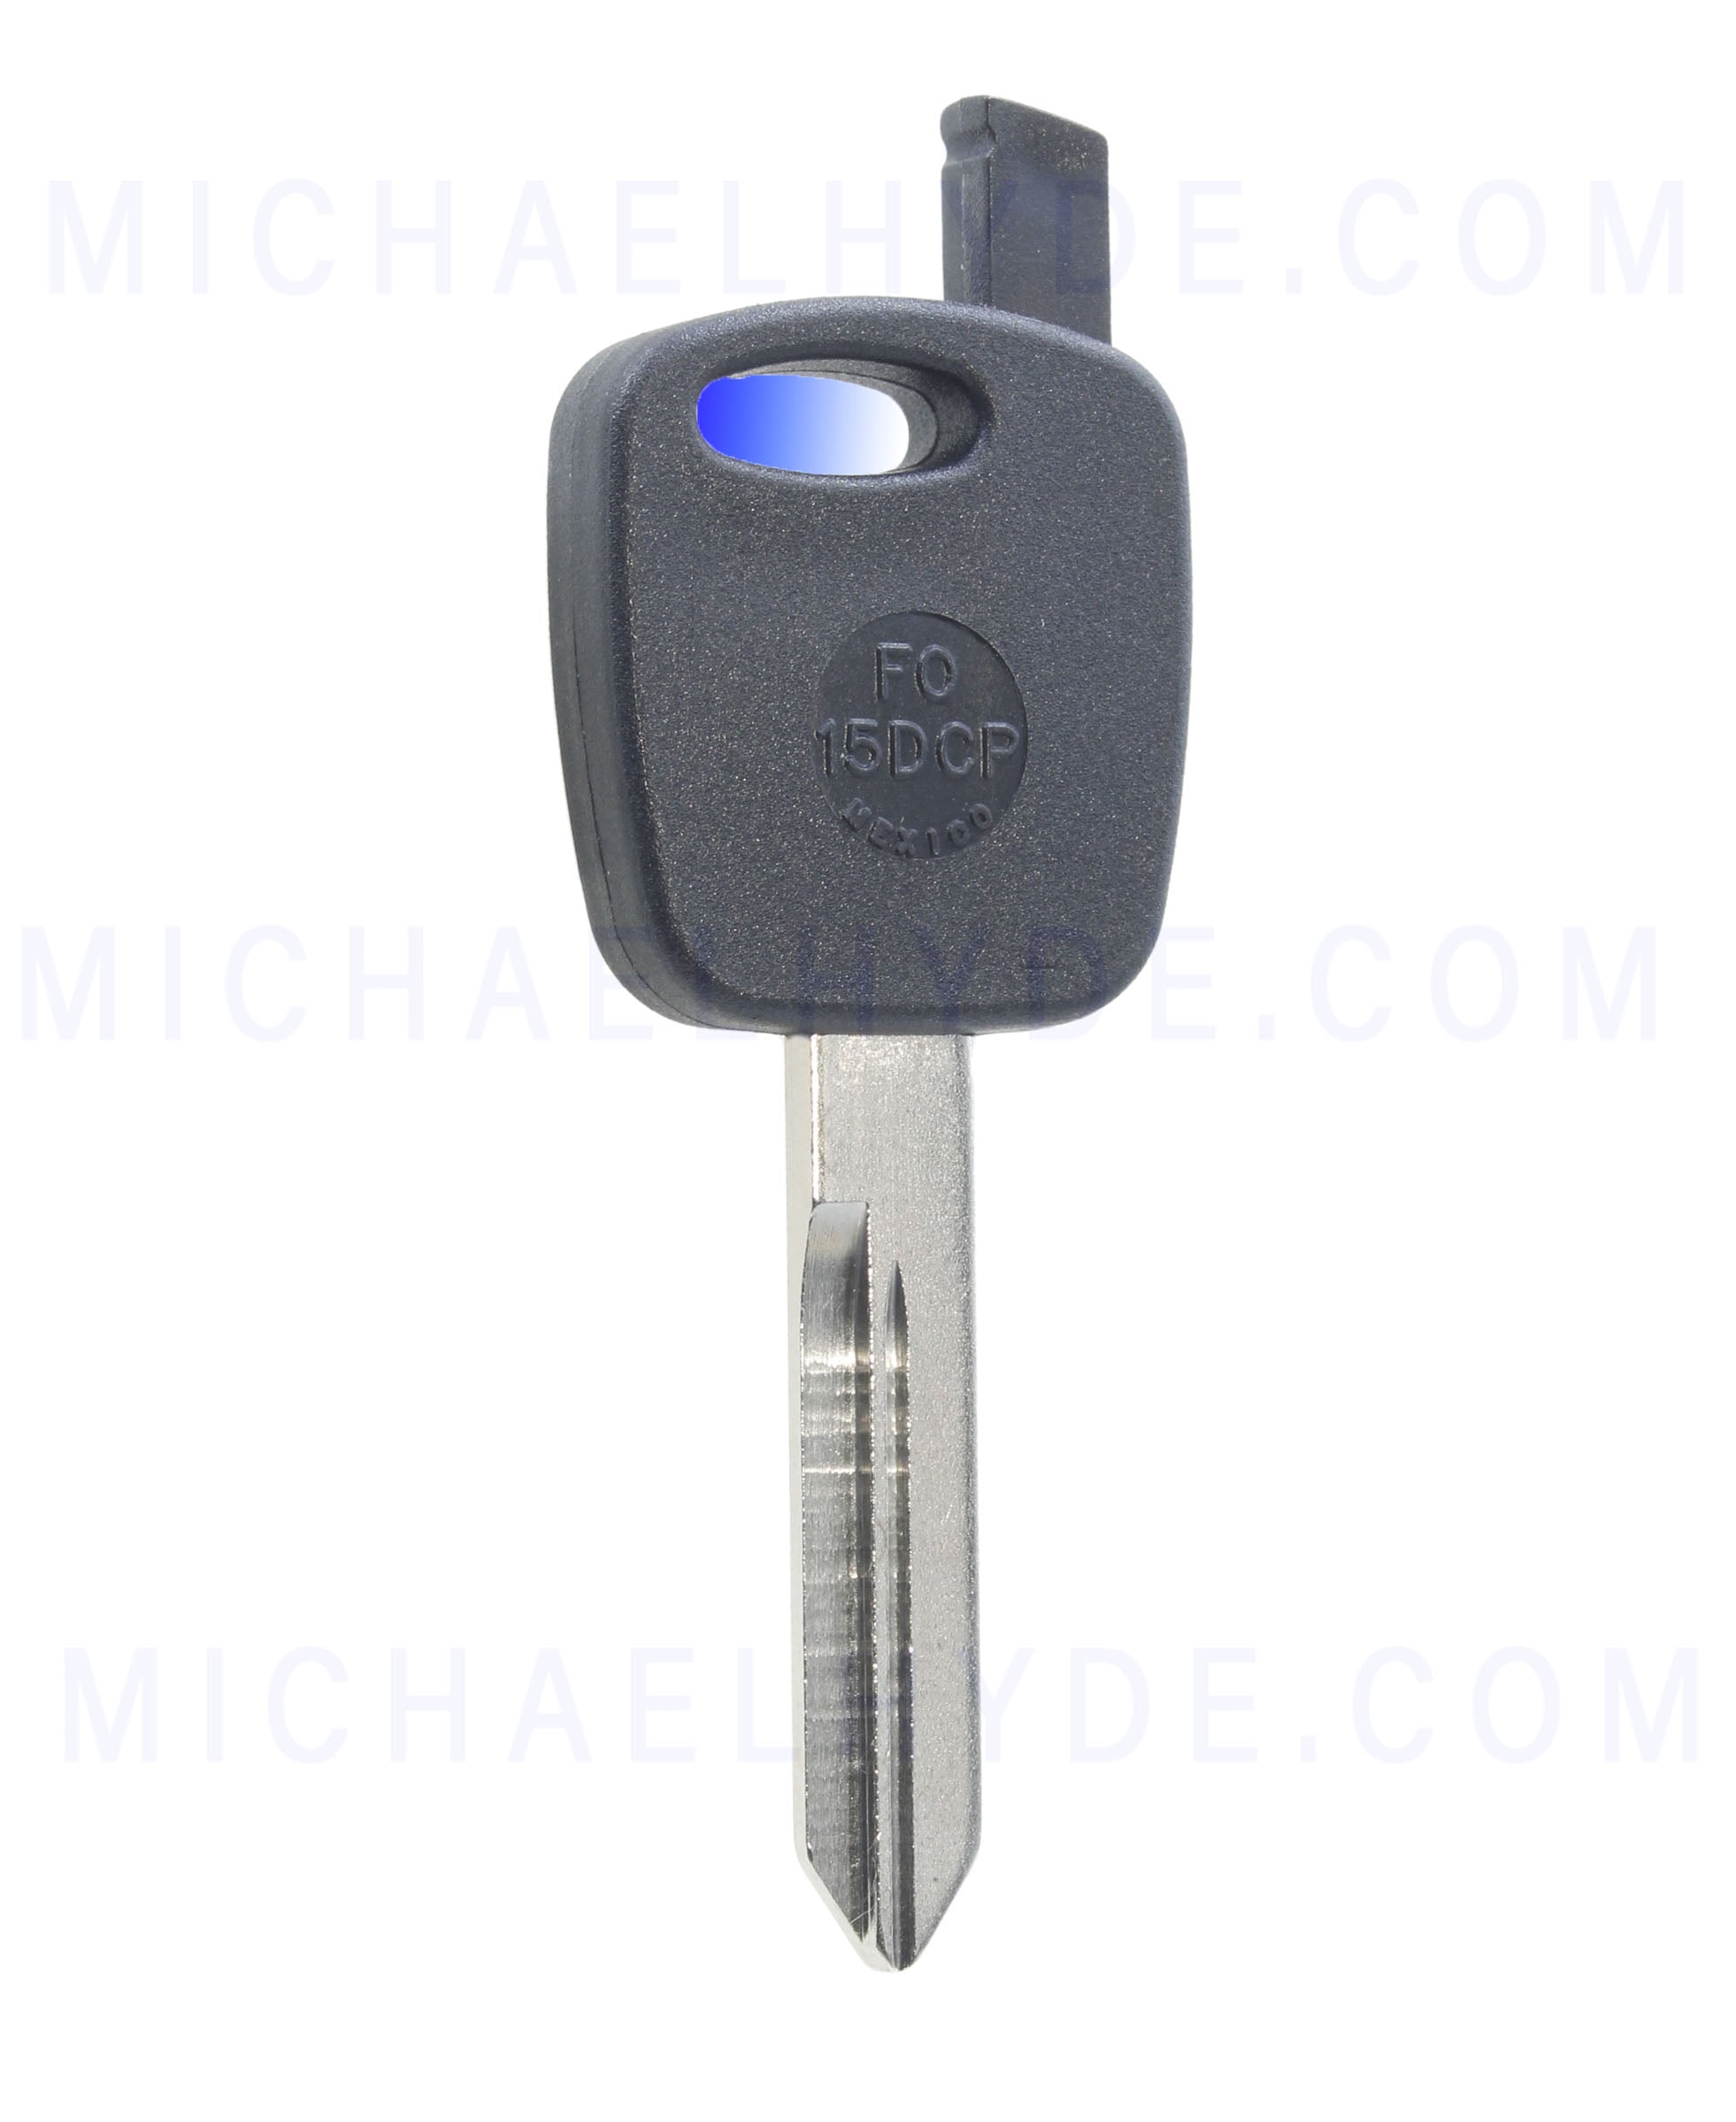 JMA Ford H72 (8 Cut) Shell Key, Older Fords - JMA-TO00FO-15DC.P